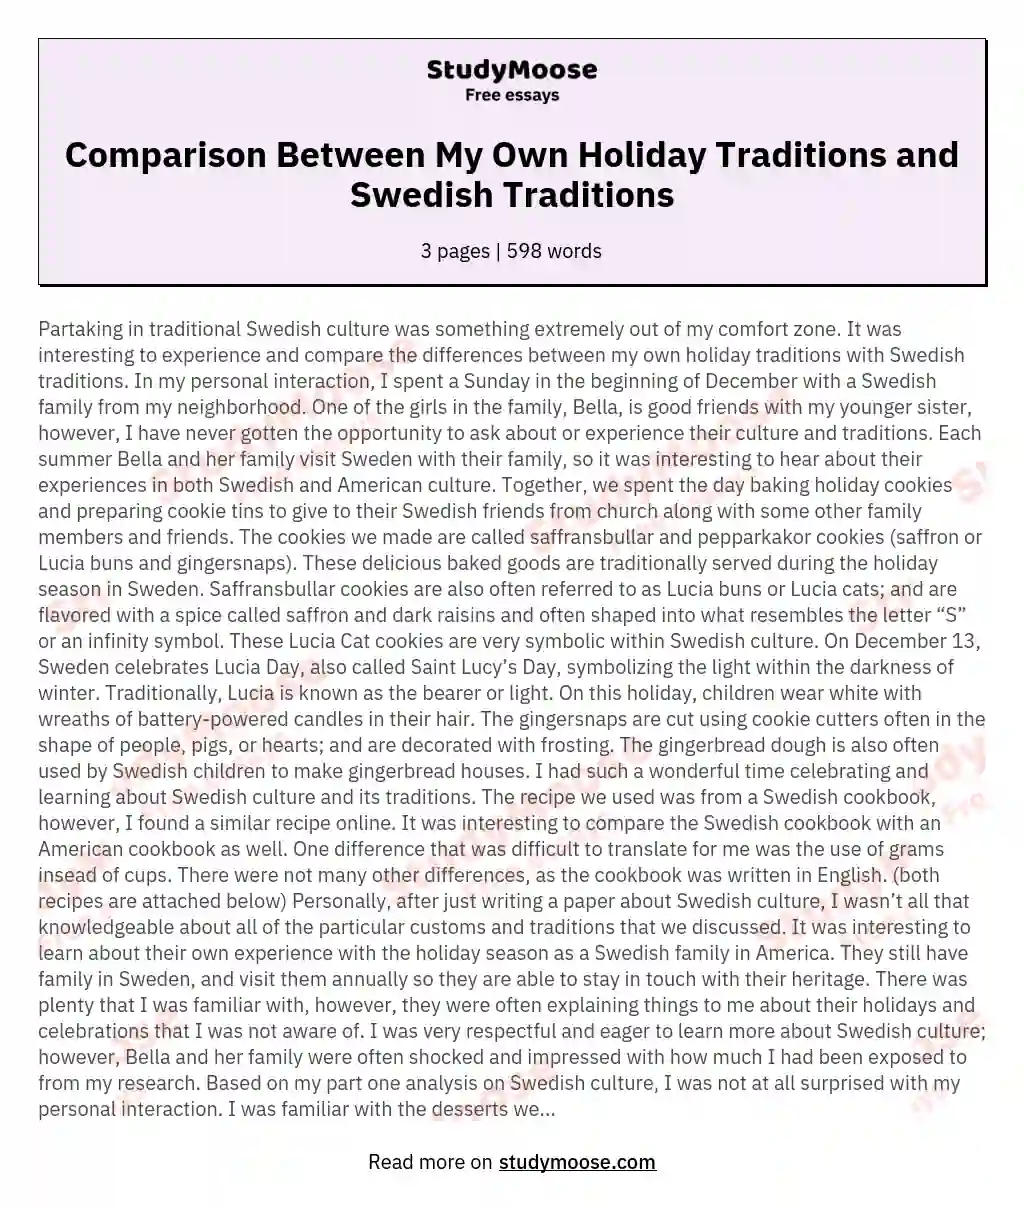 Comparison Between My Own Holiday Traditions and Swedish Traditions essay